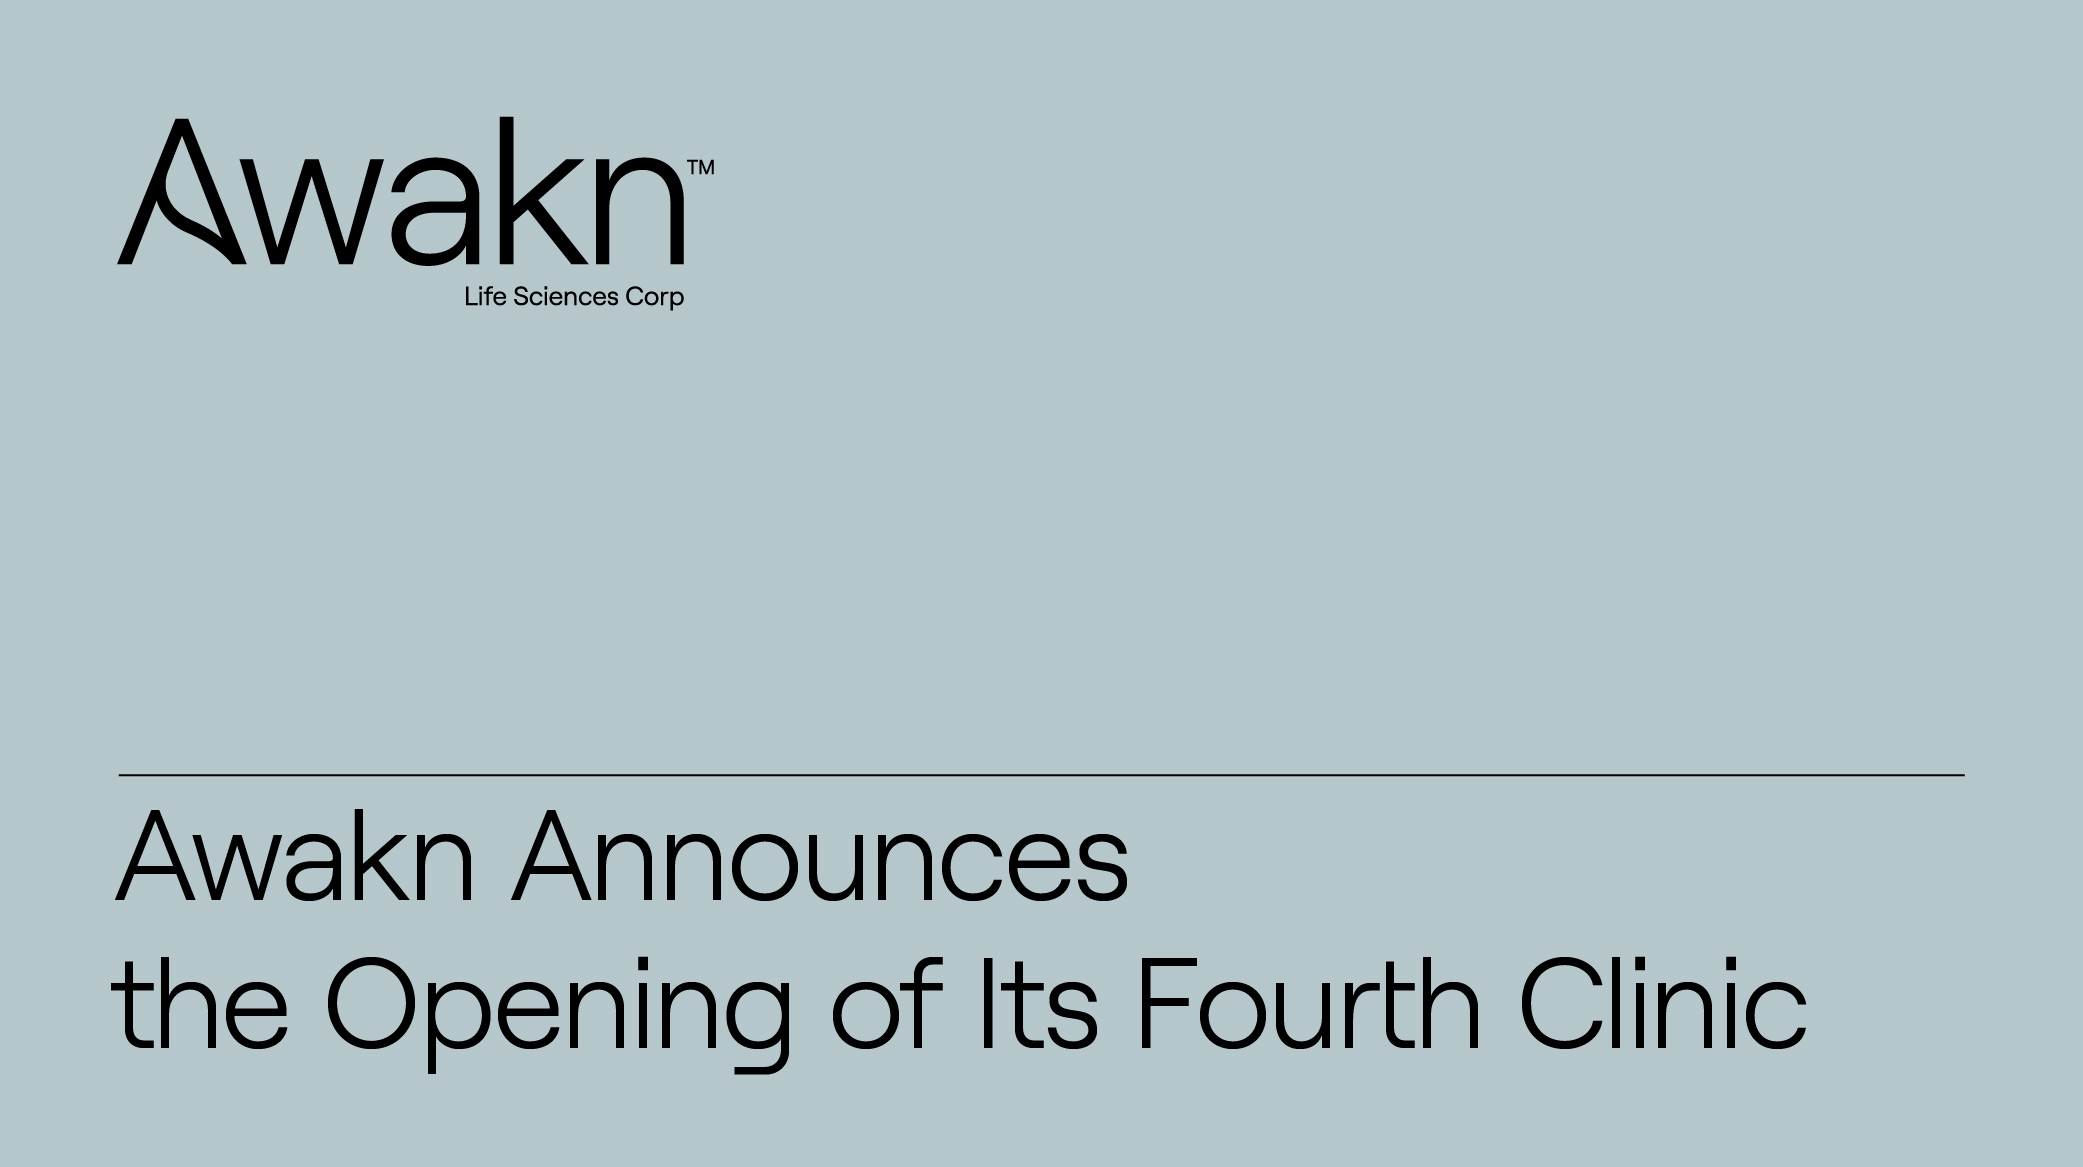 Awakn Life Sciences Announces The Opening of Its Fourth Clinic